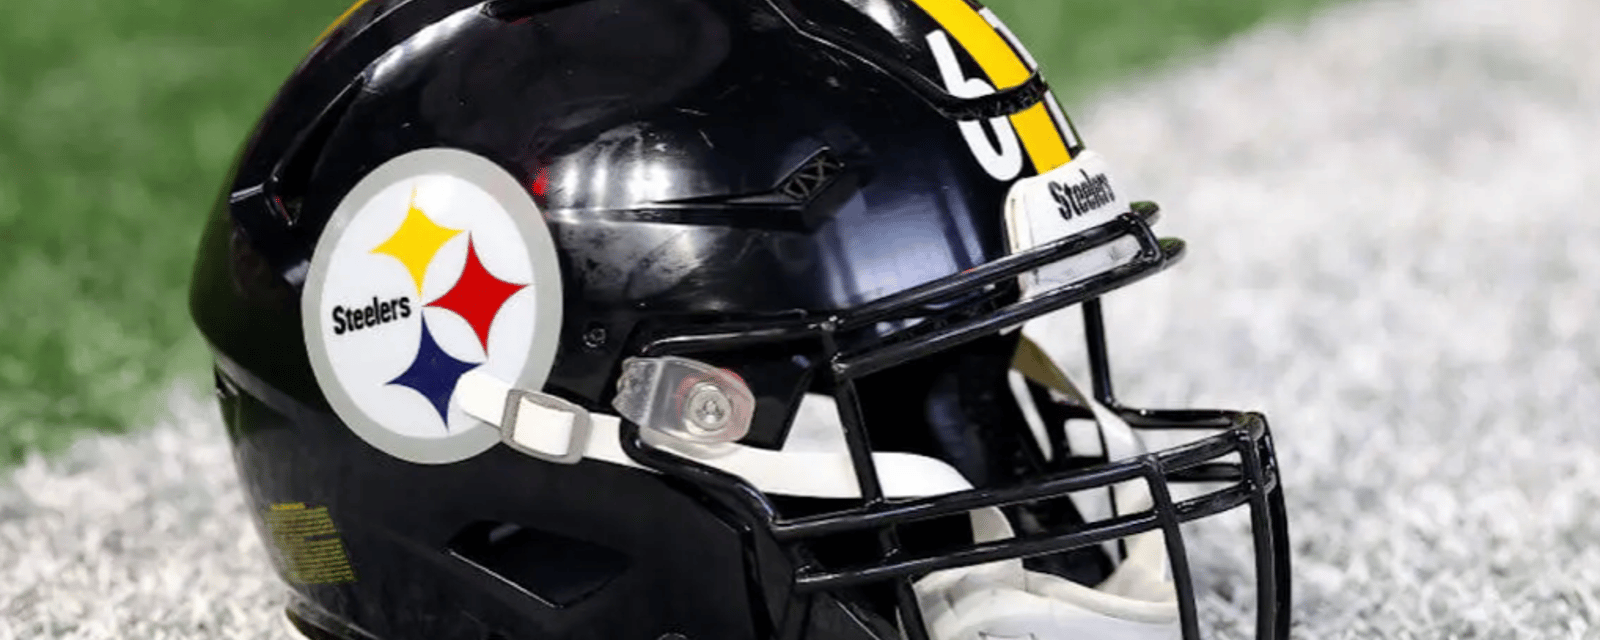 Report: Steelers could lose assistant coach 